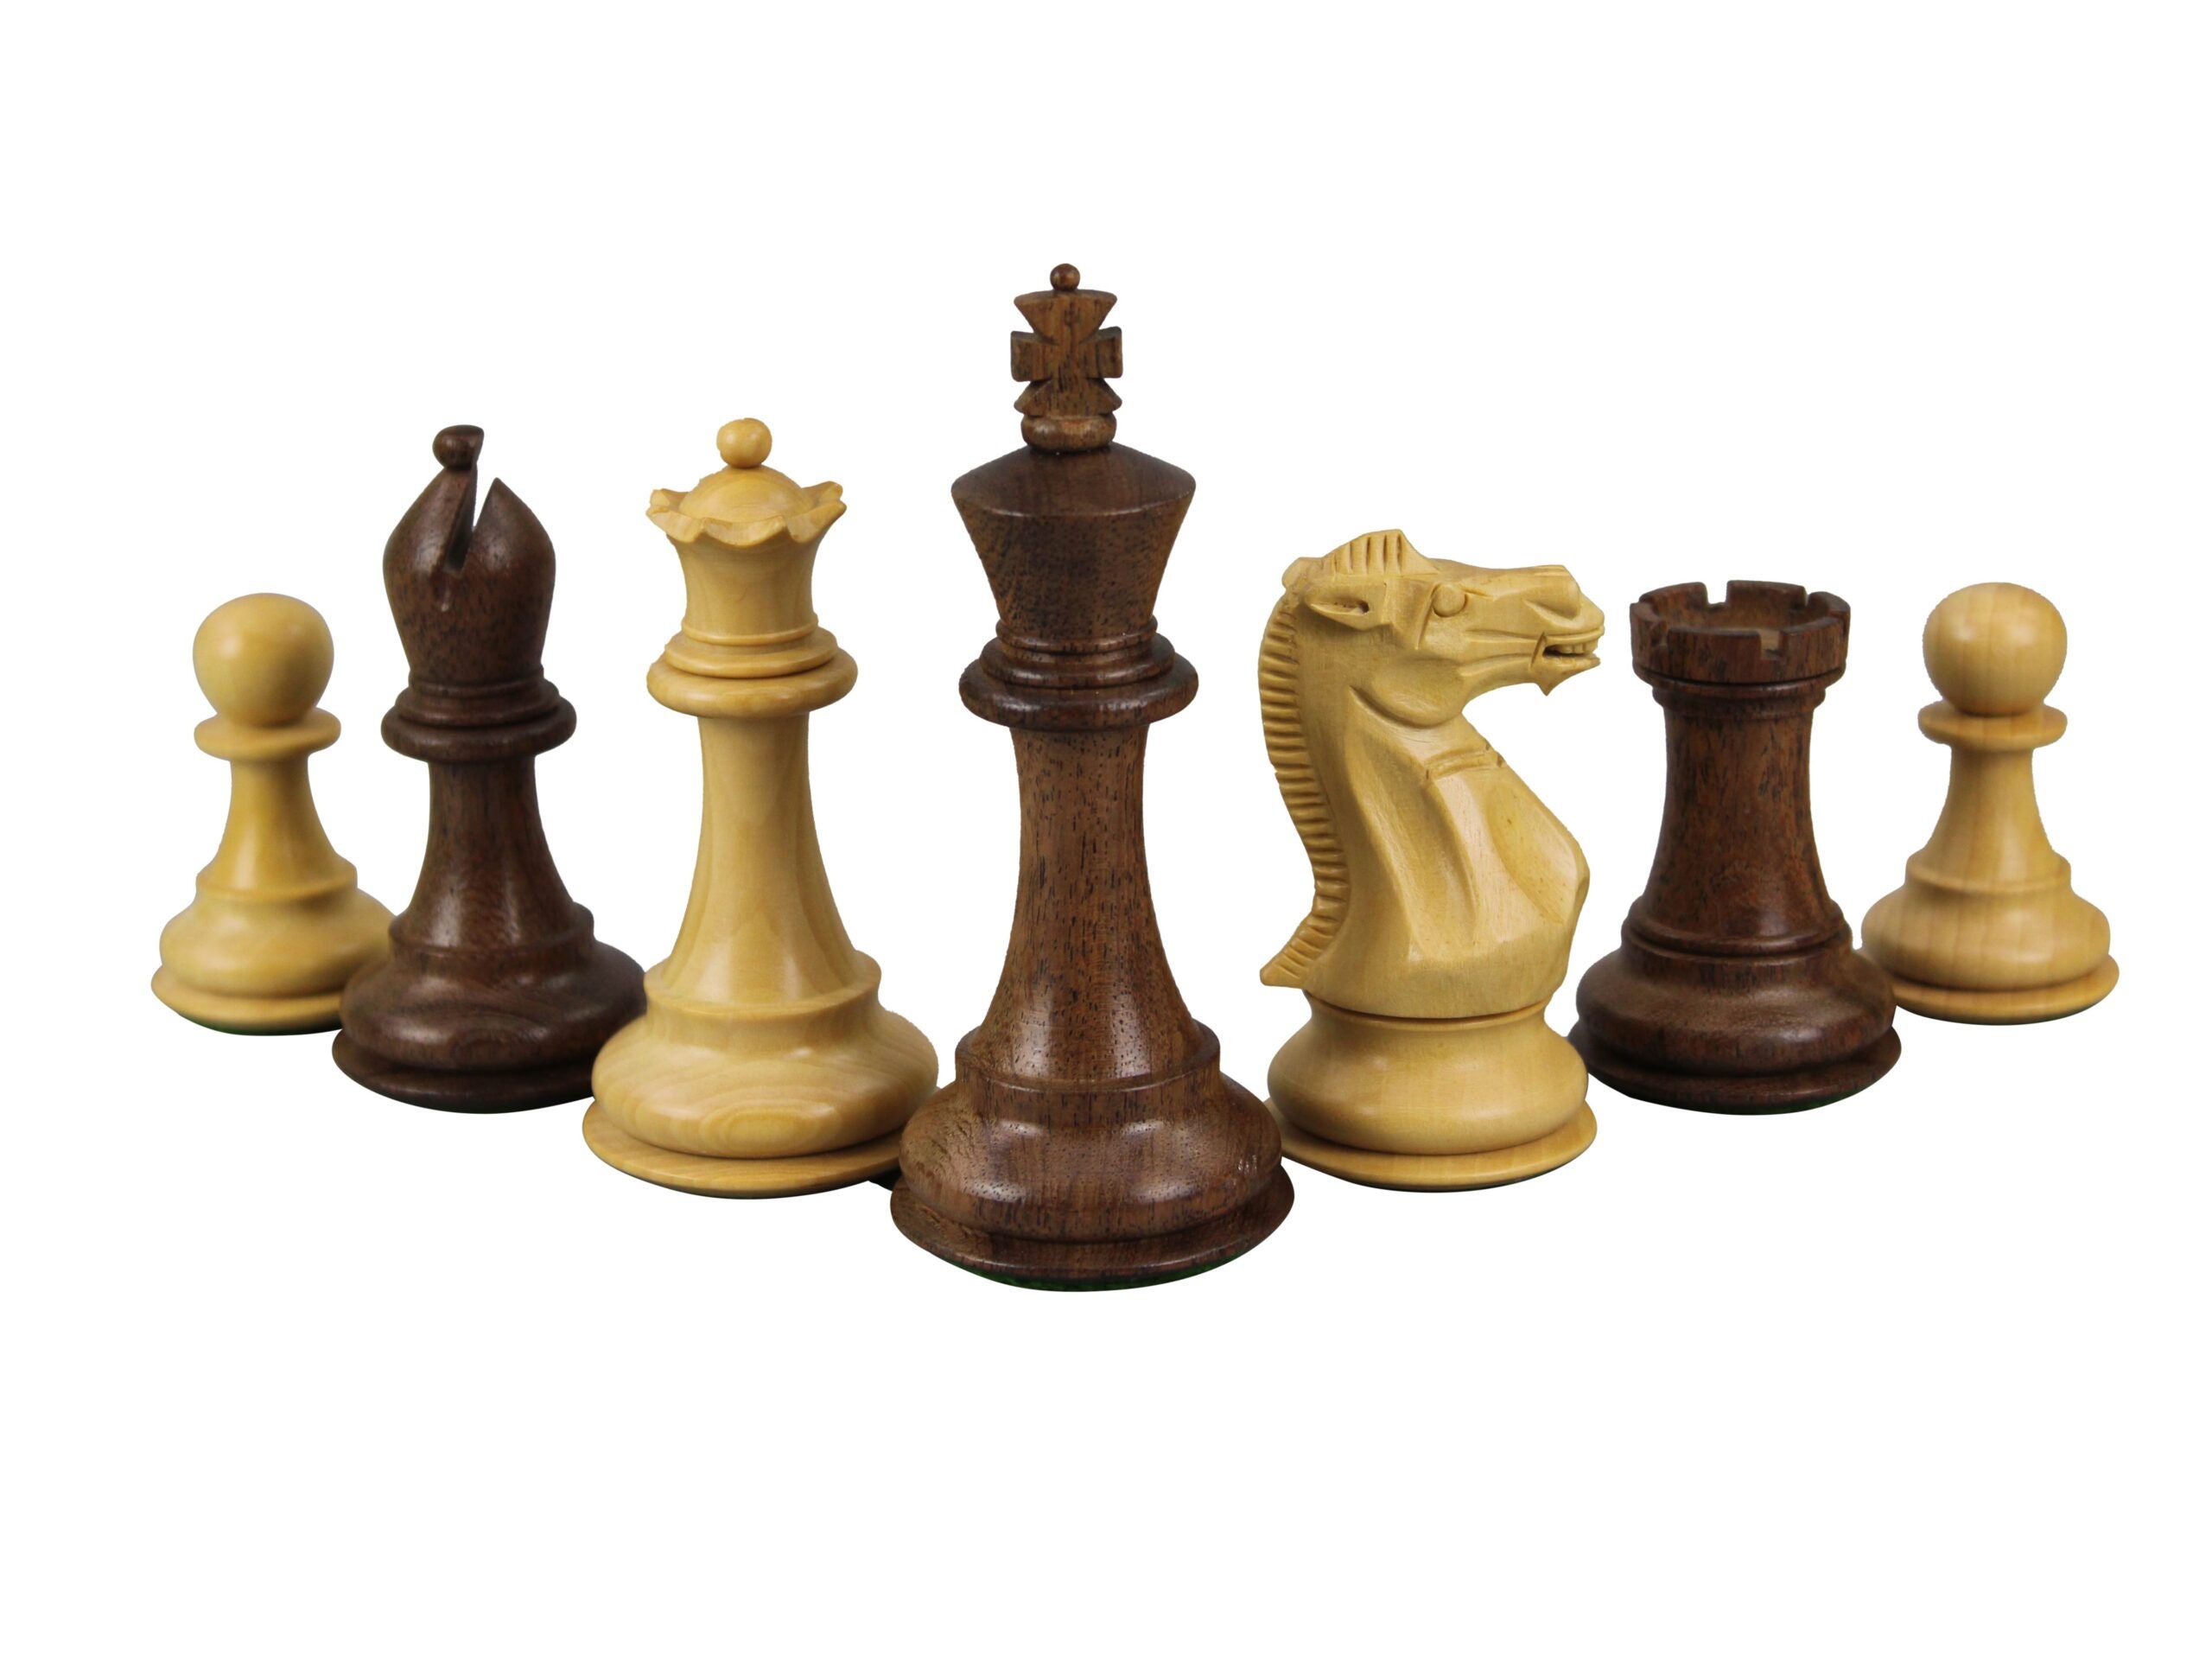 Paul Morphy and the golden age of chess